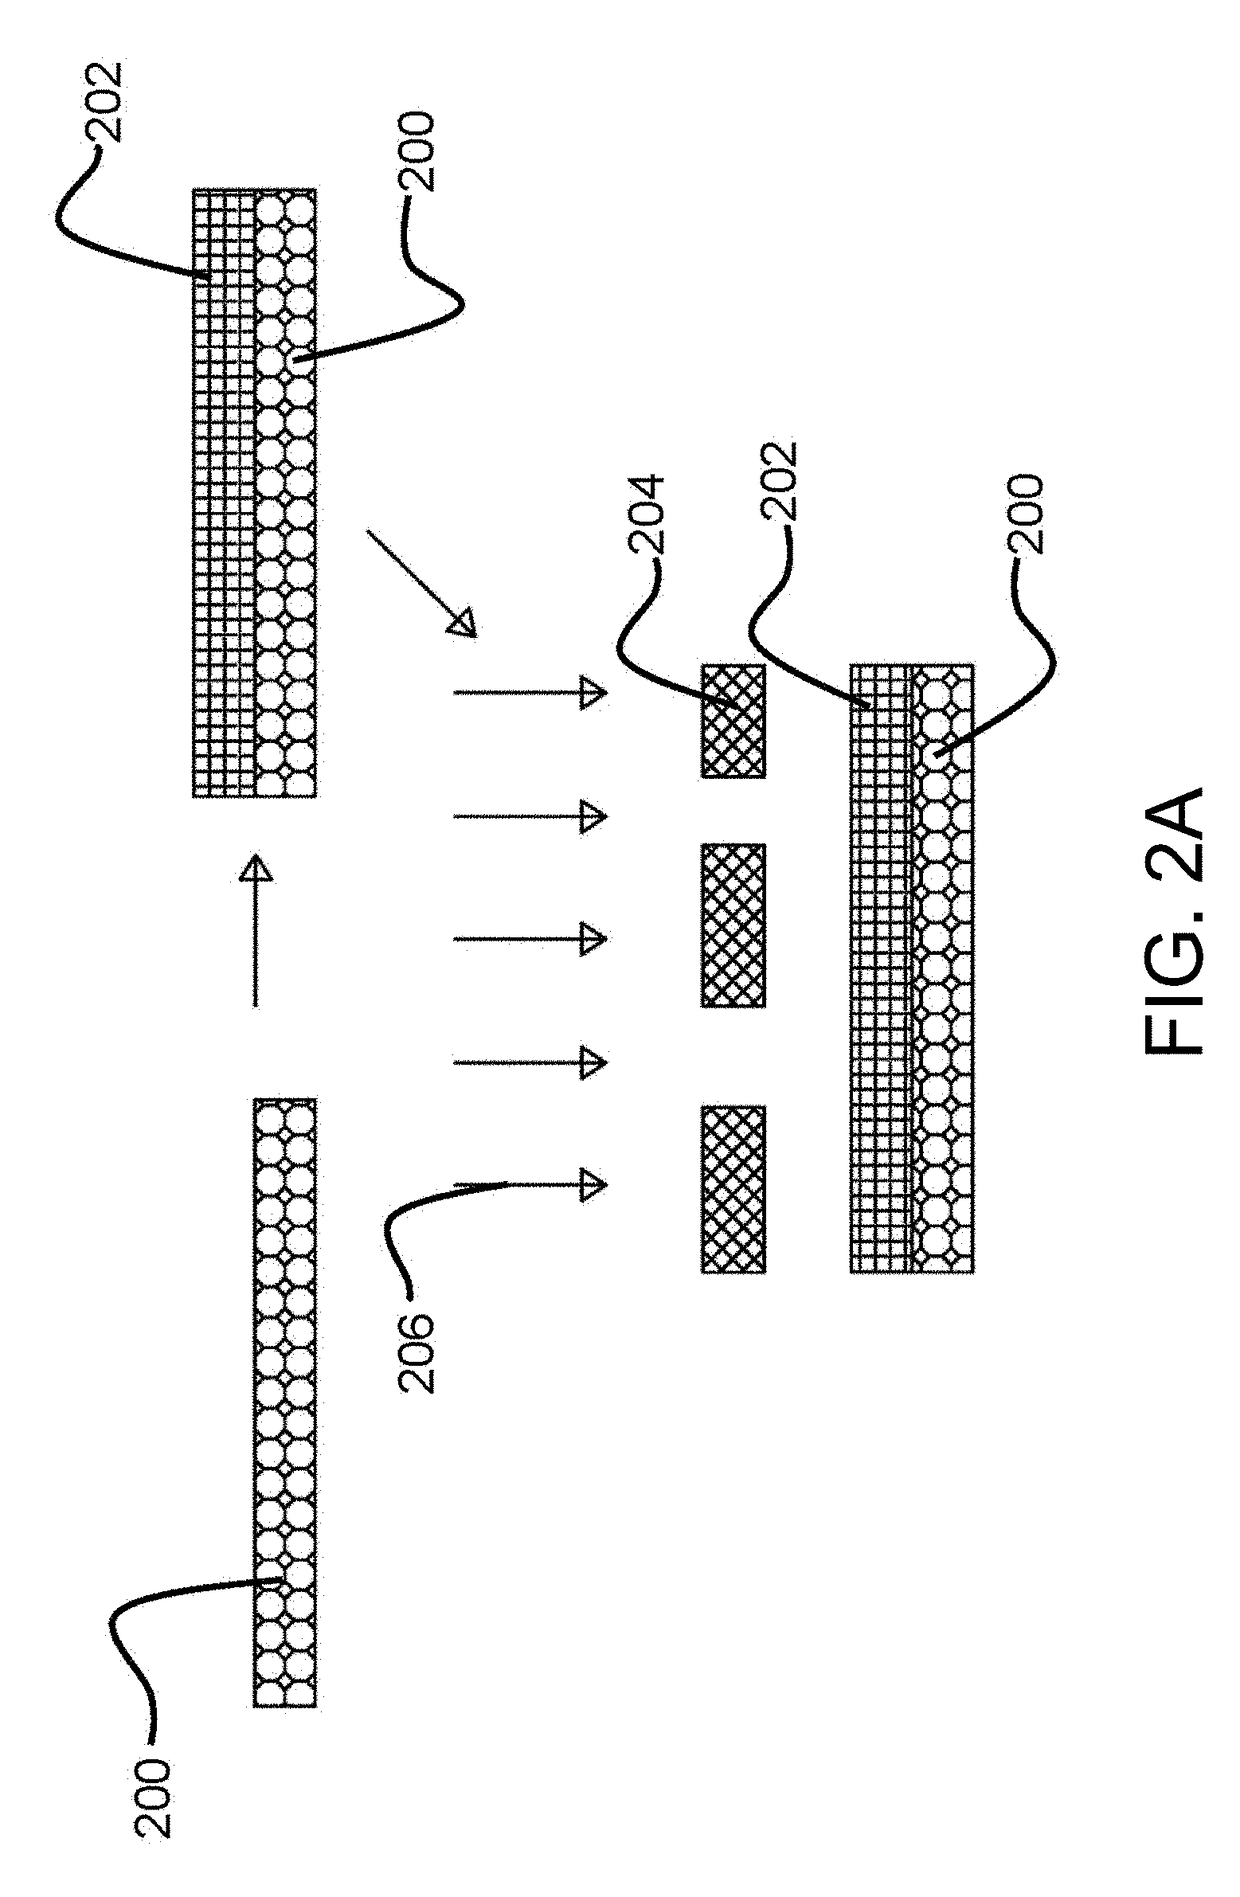 Process for creating high efficiency photovoltaic cells